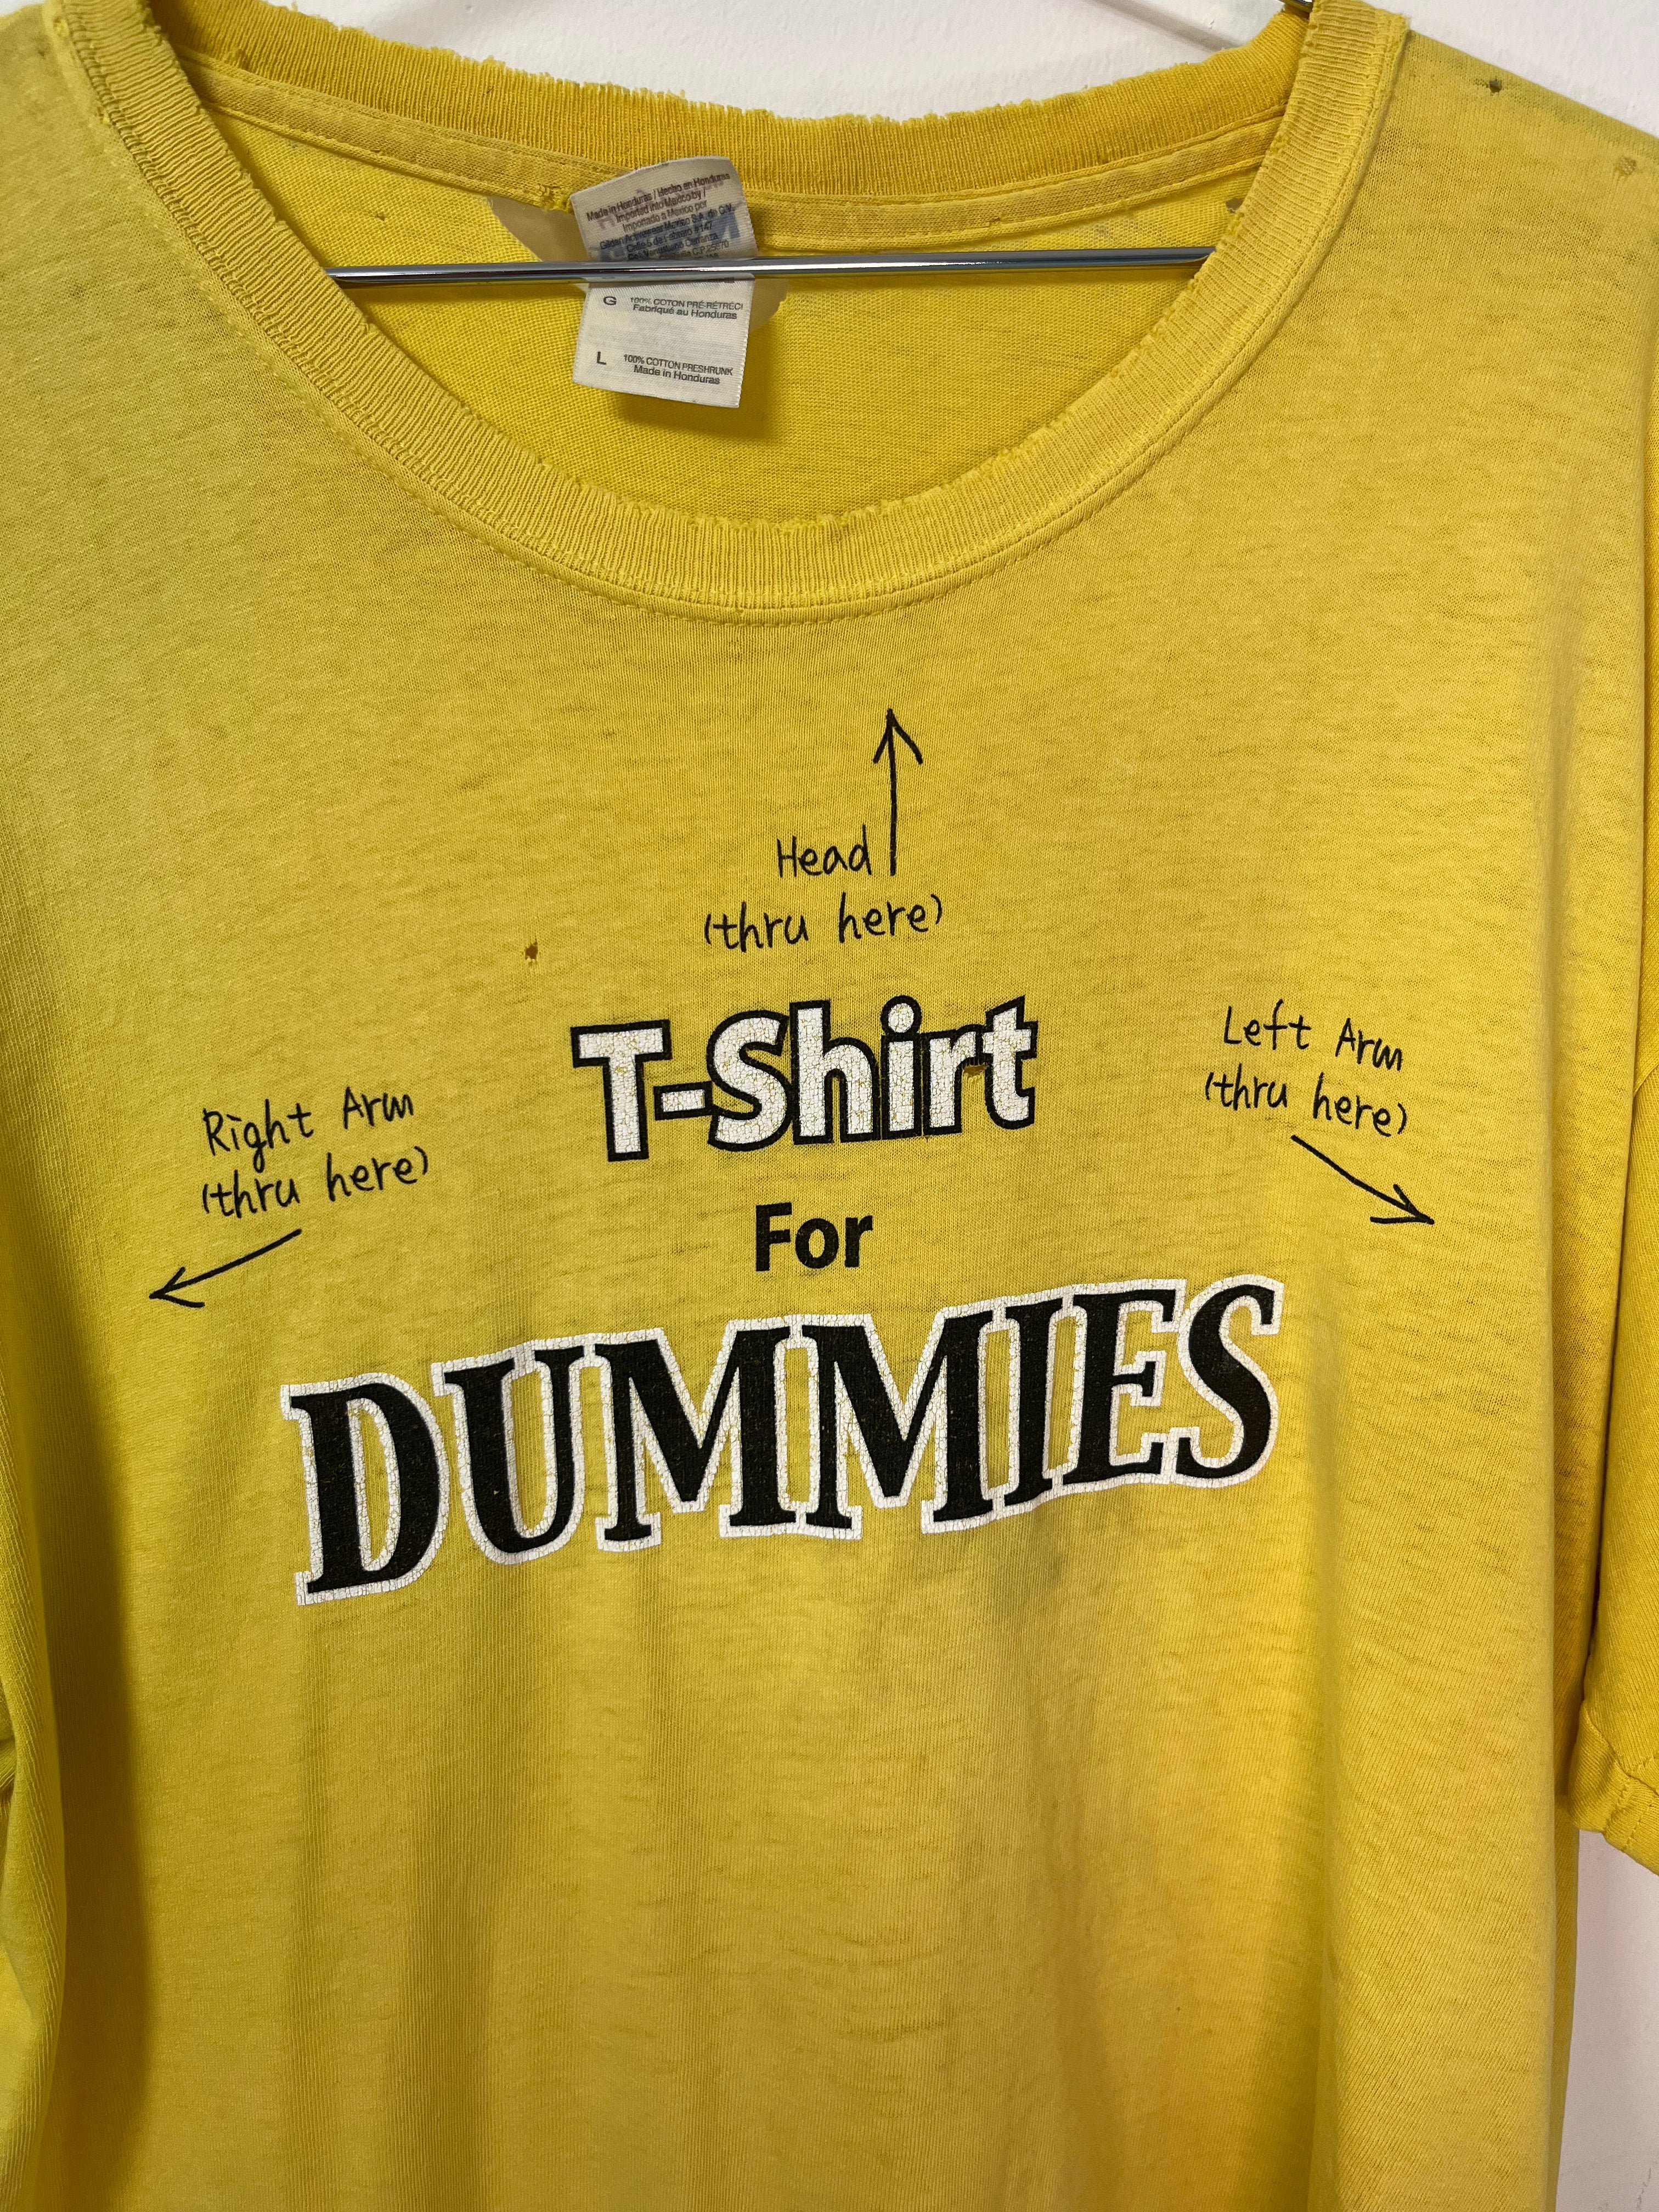 90s T-Shirt For Dummies Humor T-Shirt - Aged Canary Yellow - M/L